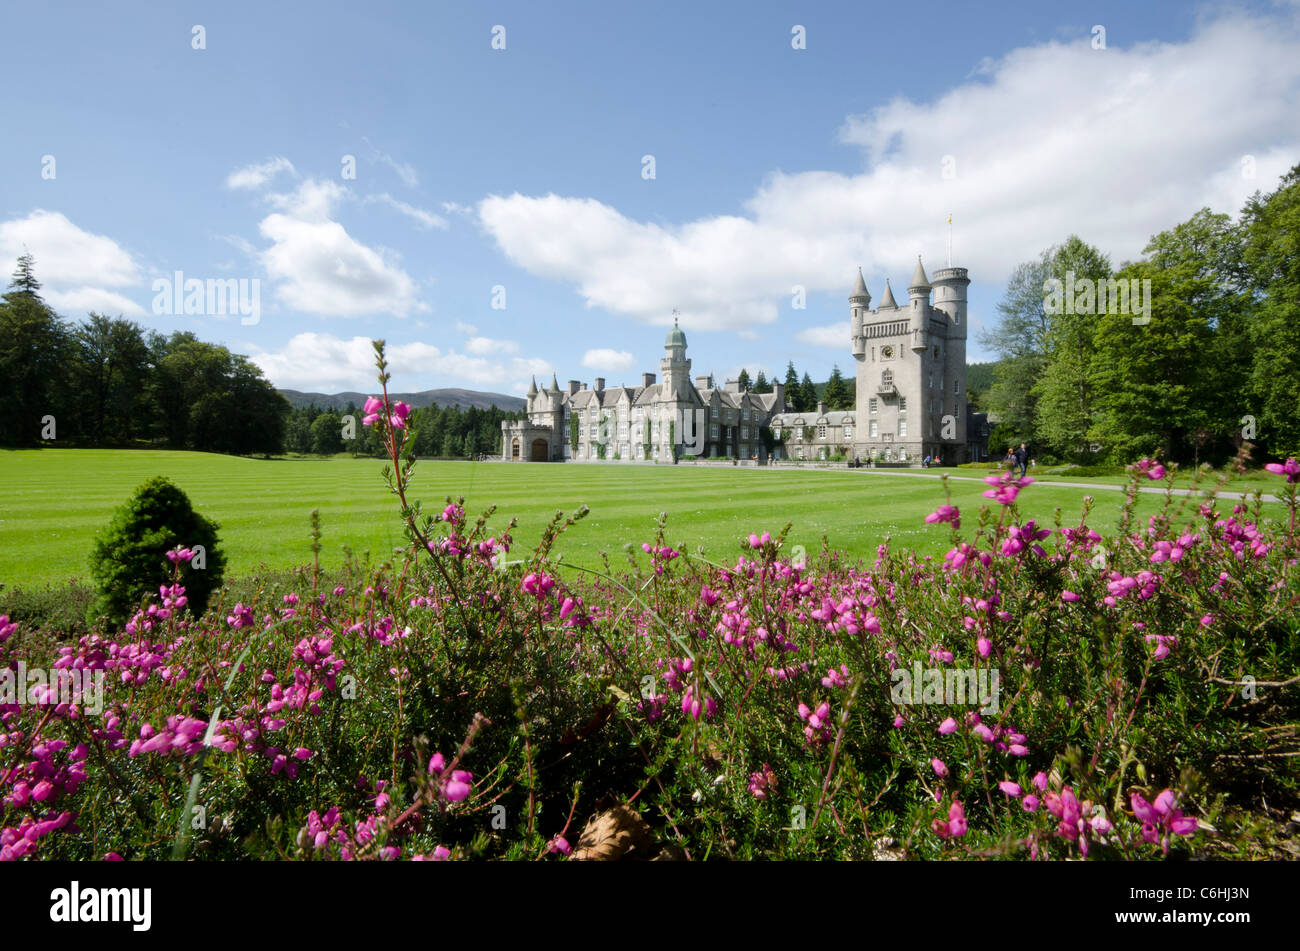 Balmoral Castle Royal Deeside  - Queen's residence view with heather in foreground Stock Photo